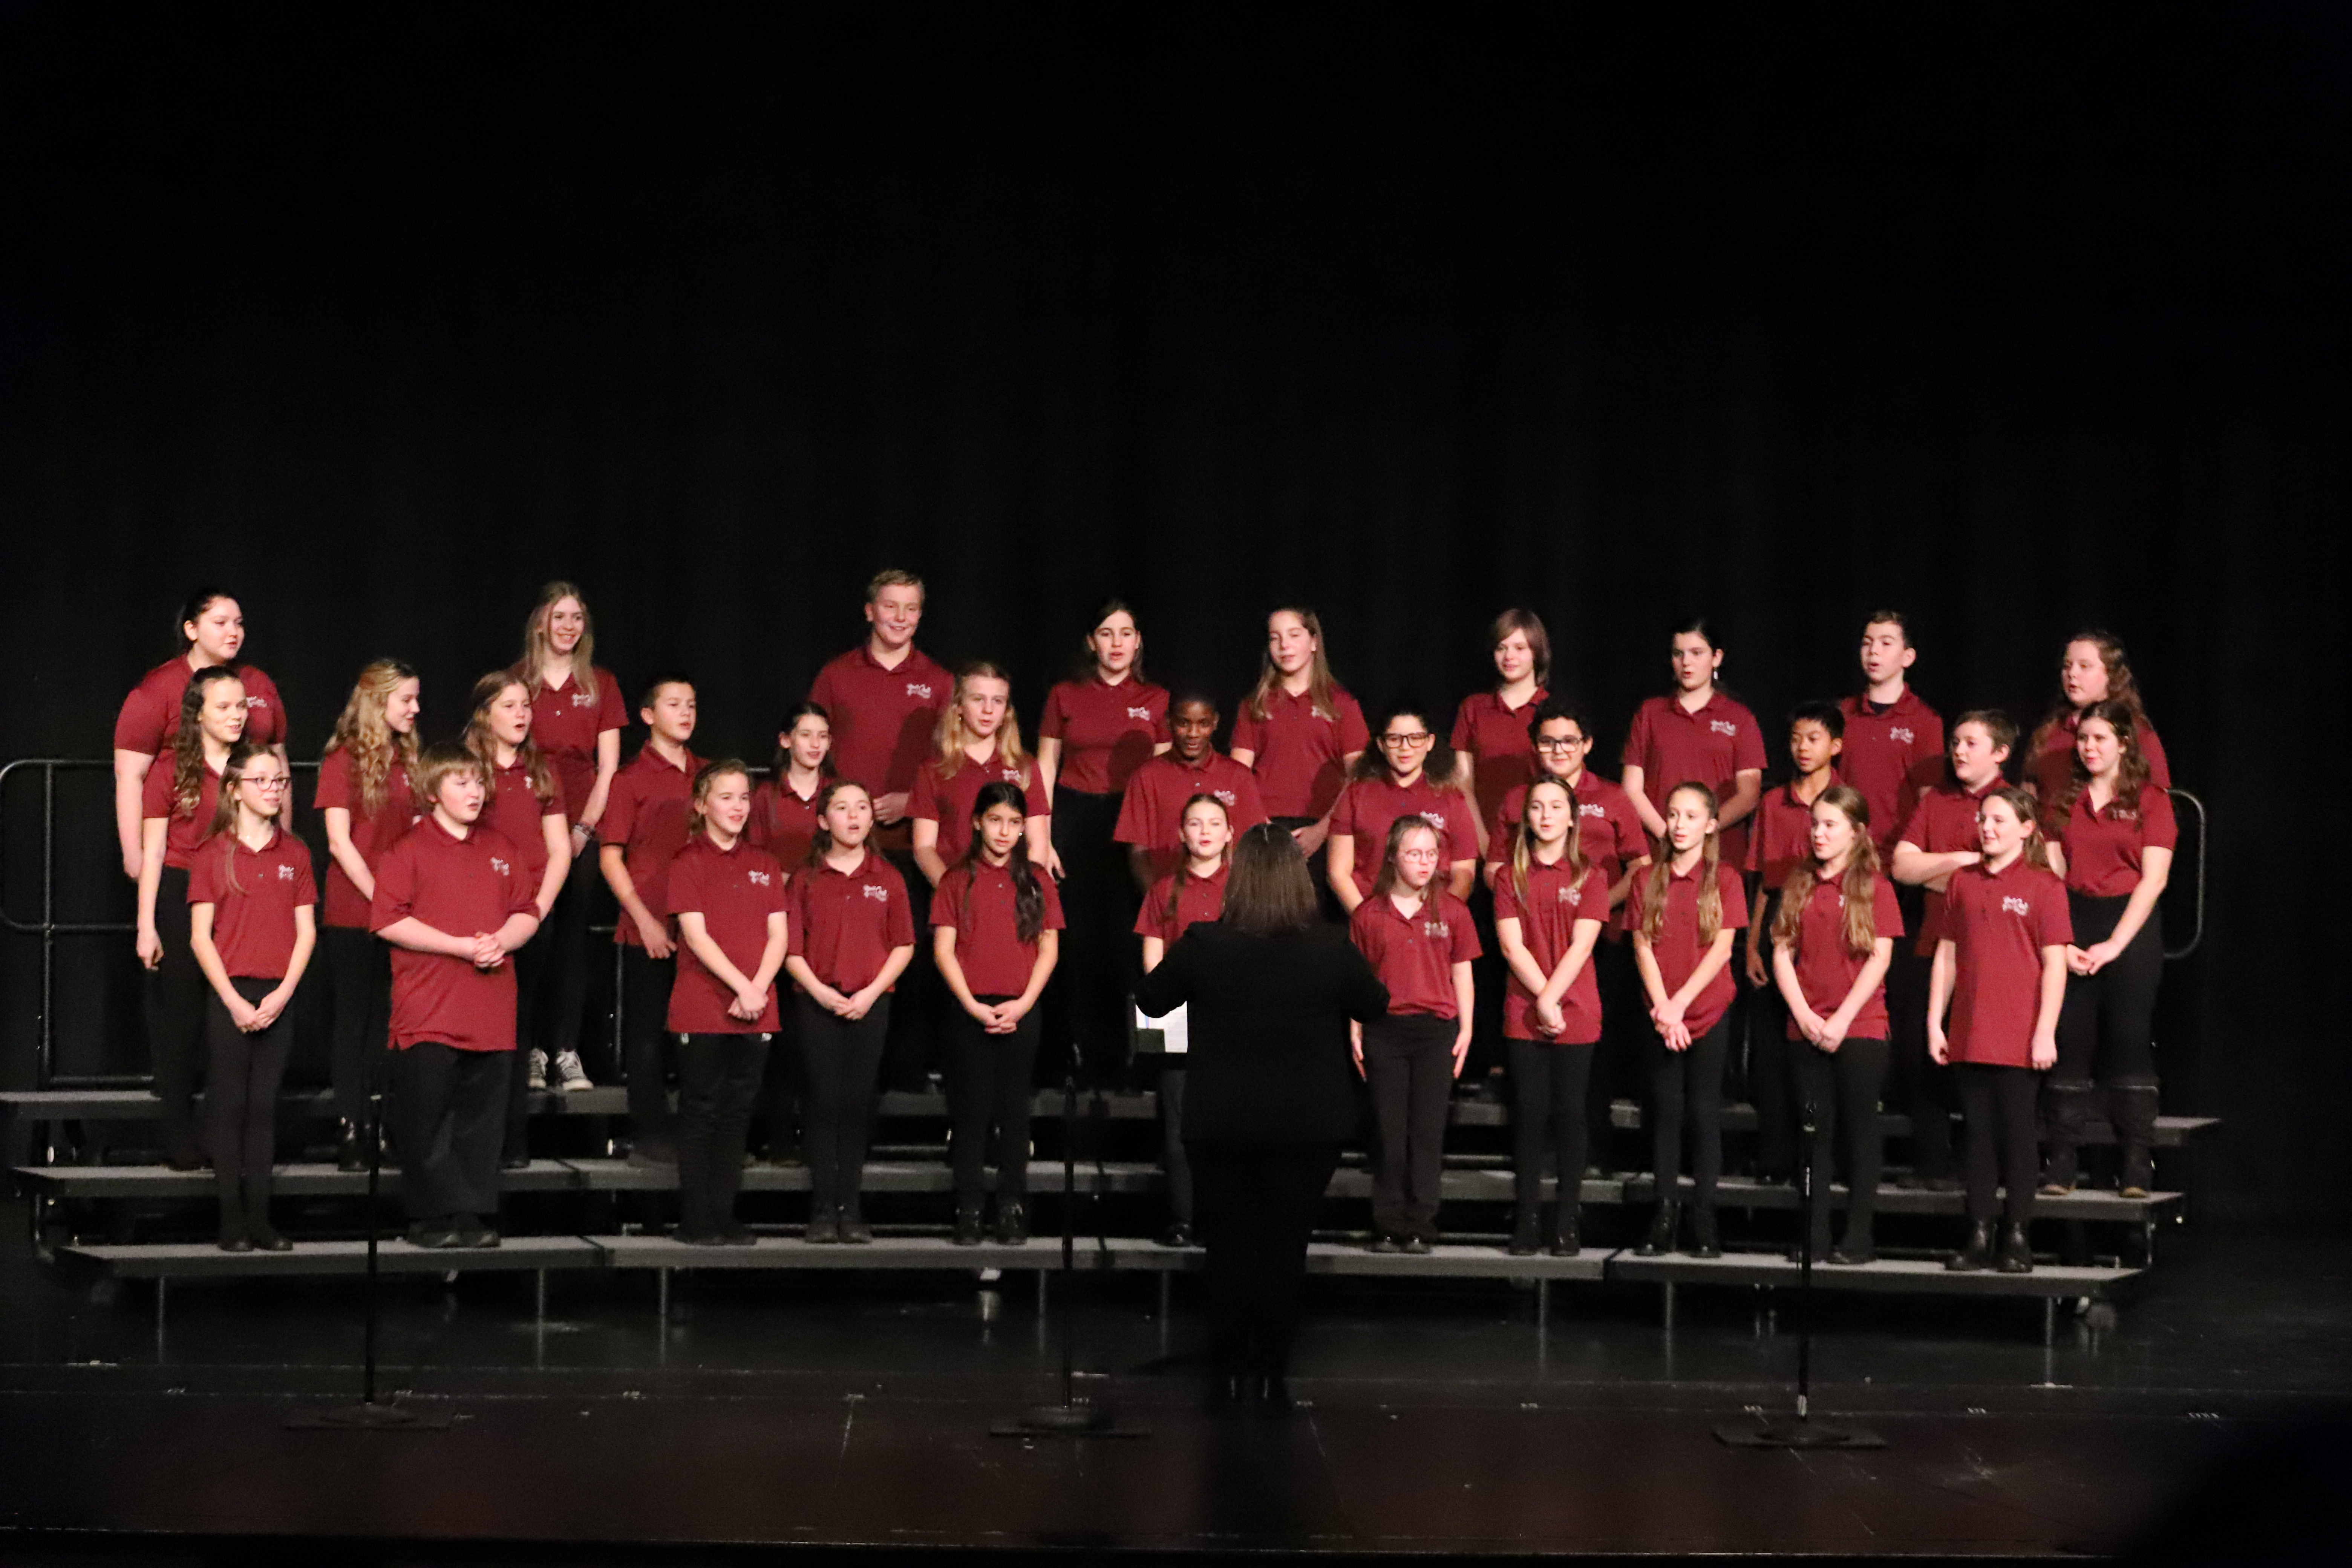 Group photos of student choral music performances